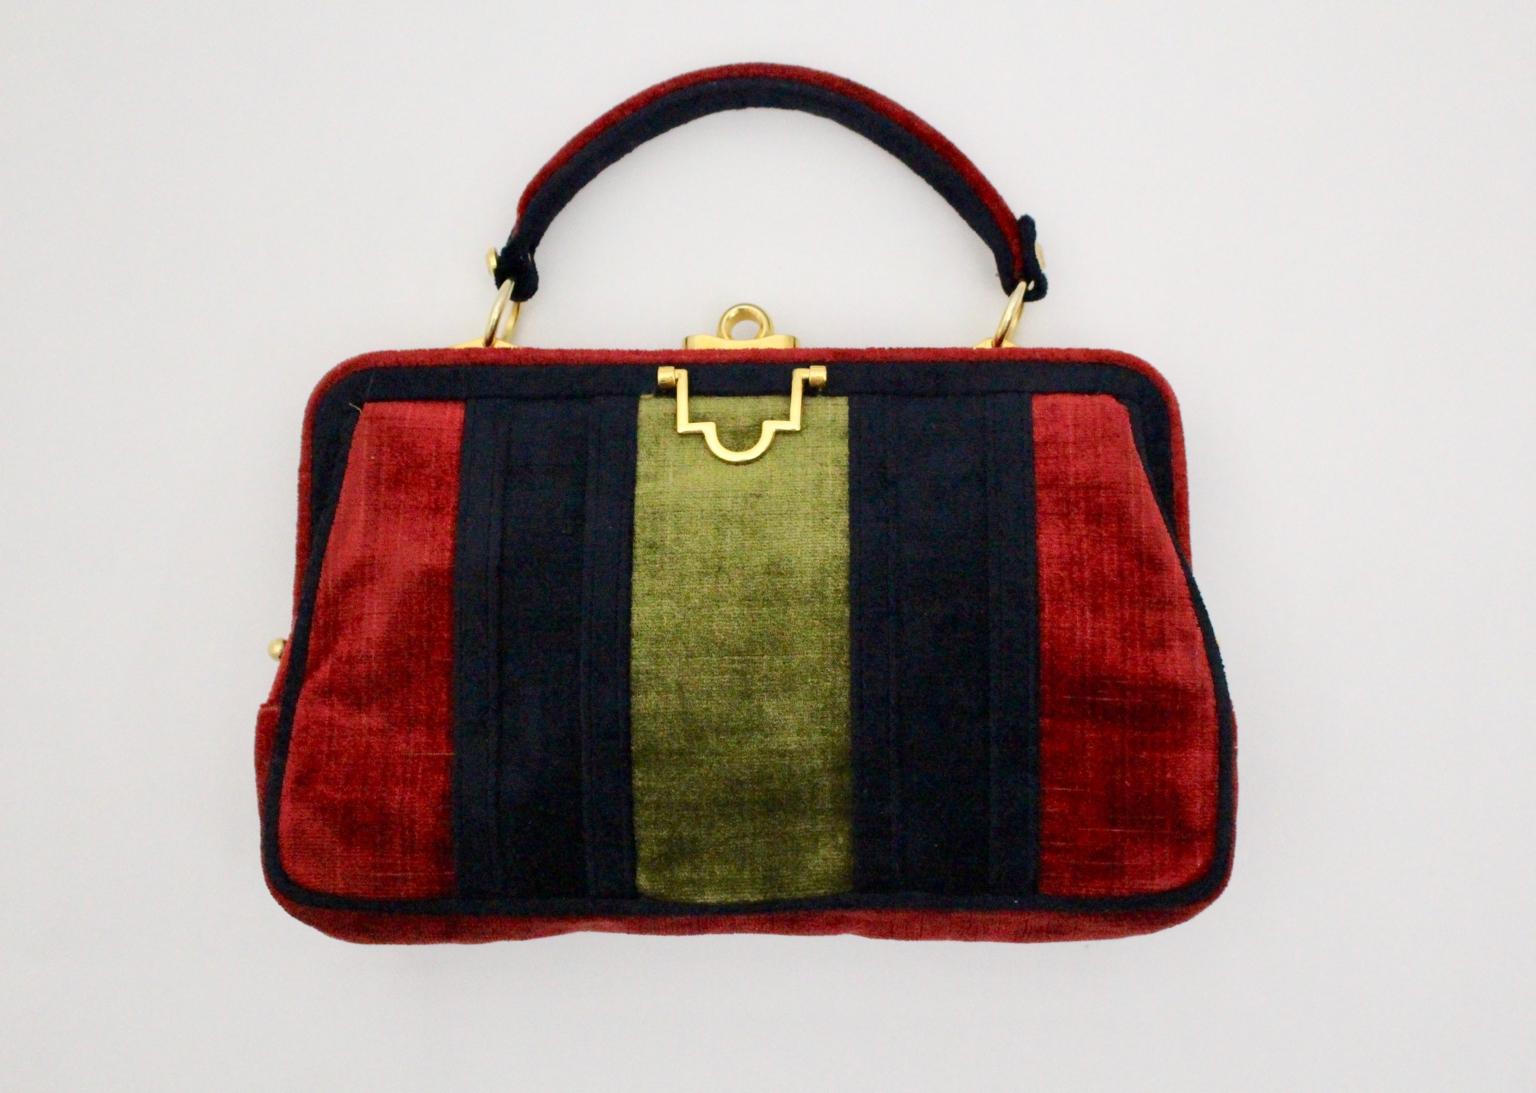 This mid century modern velvet vintage handle bag in the style of Roberta di Camerino is a gorgeous piece from the 1960s, Italy. The surface of the handle bag contrasts the colors red, blue and green and shows also brass details. One pull down snap